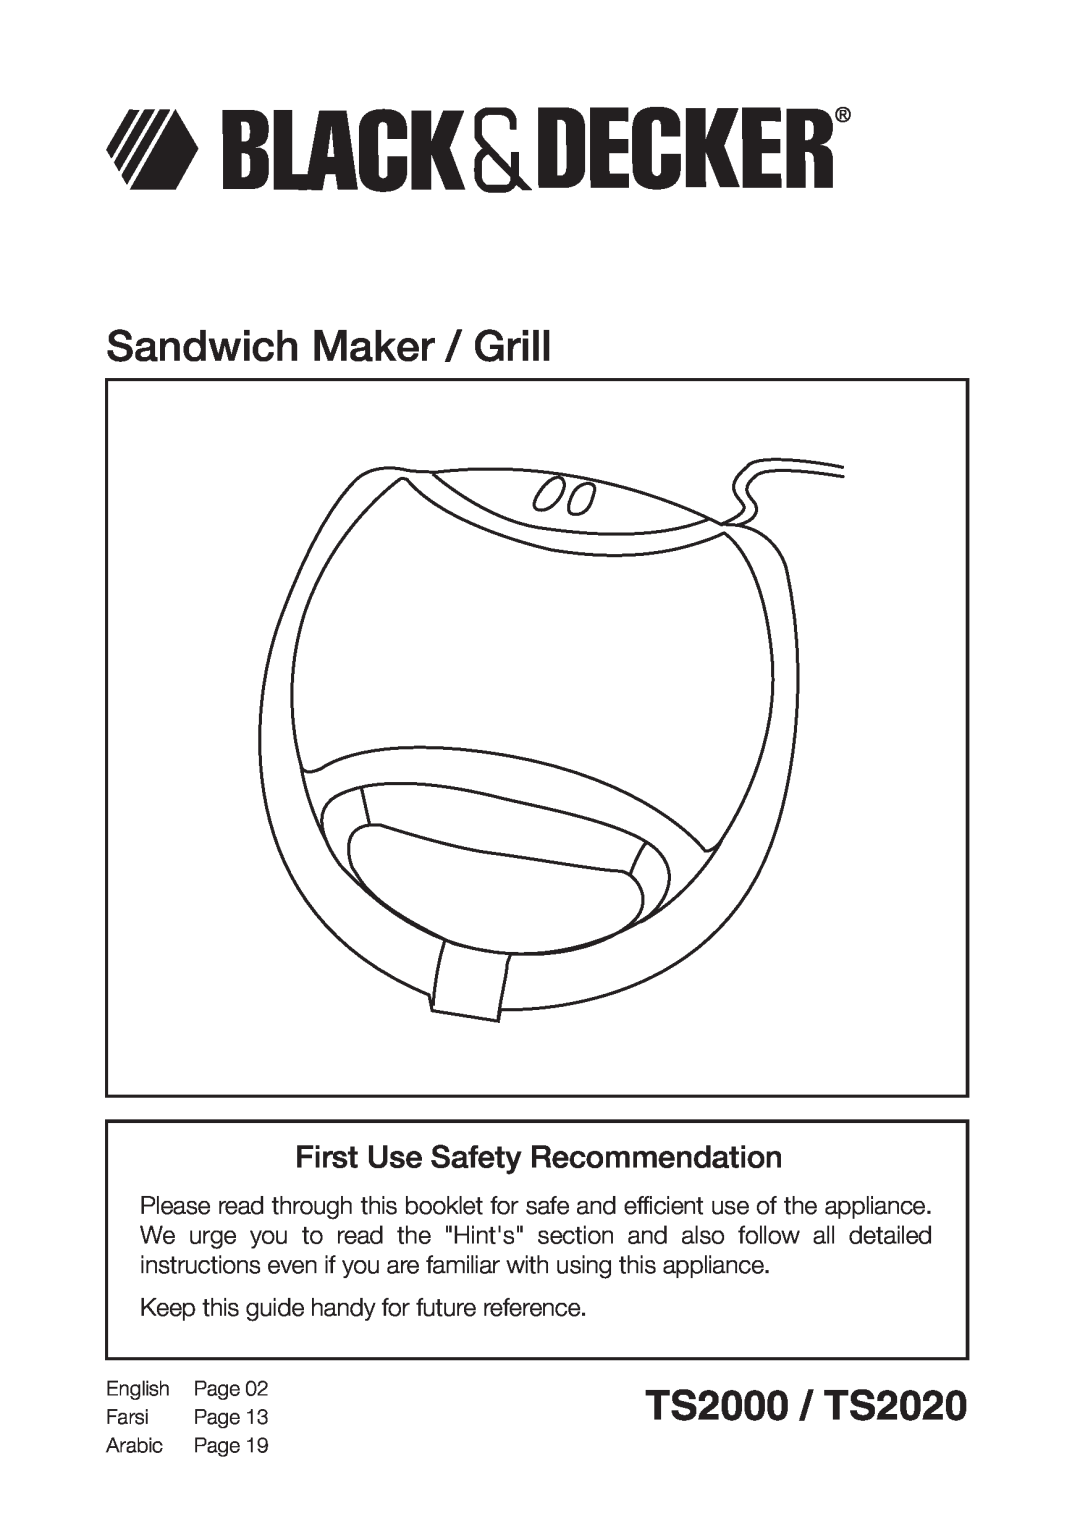 Black & Decker manual Sandwich Maker / Grill, TS2000 / TS2020, First Use Safety Recommendation, English, Page, Farsi 